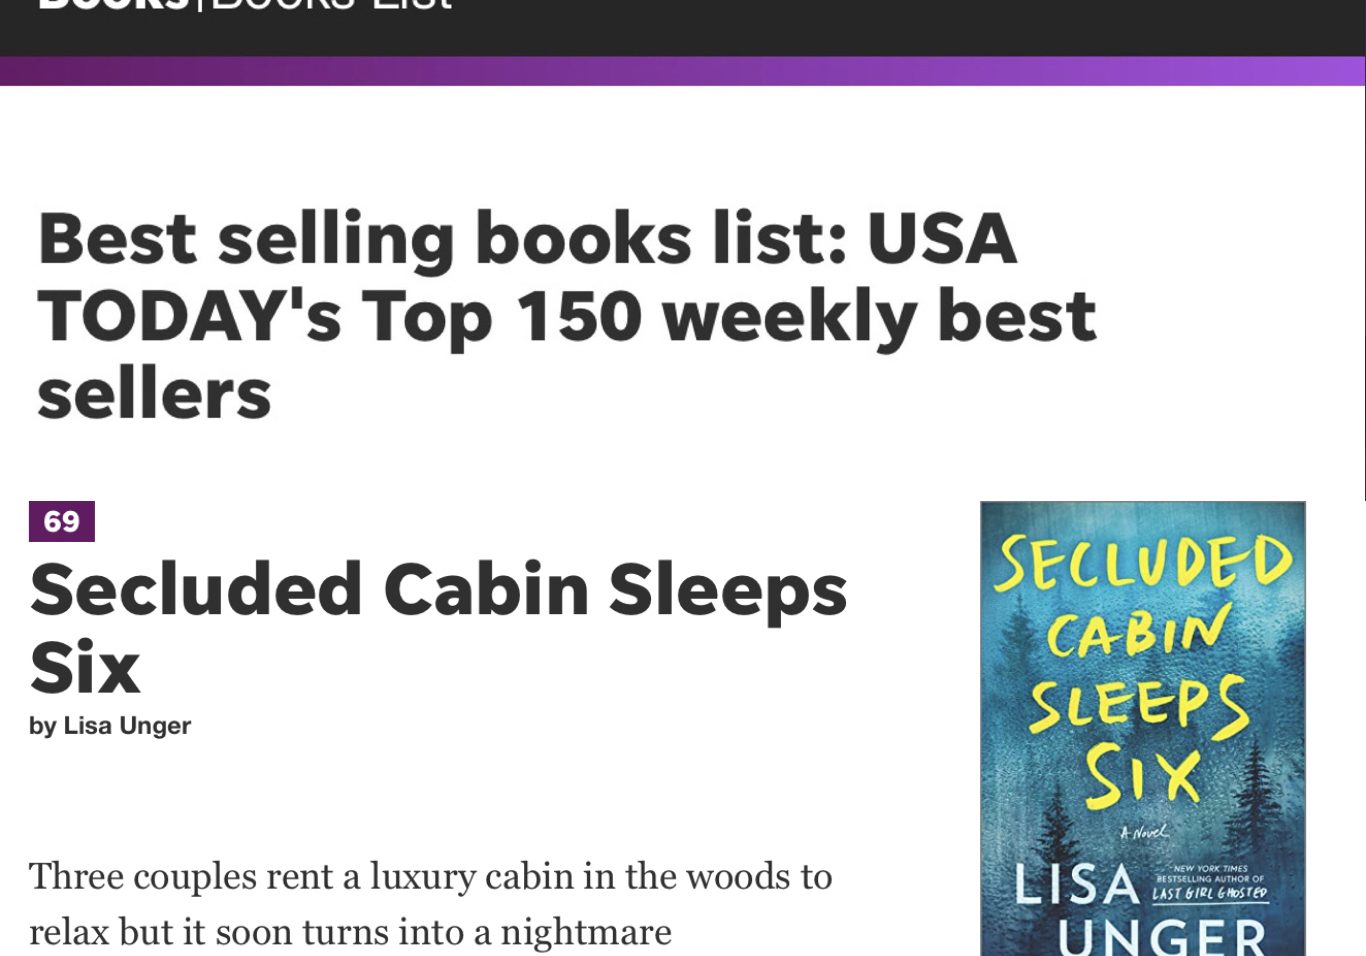 USA Today Bestseller - Secluded Cabin Sleeps Six